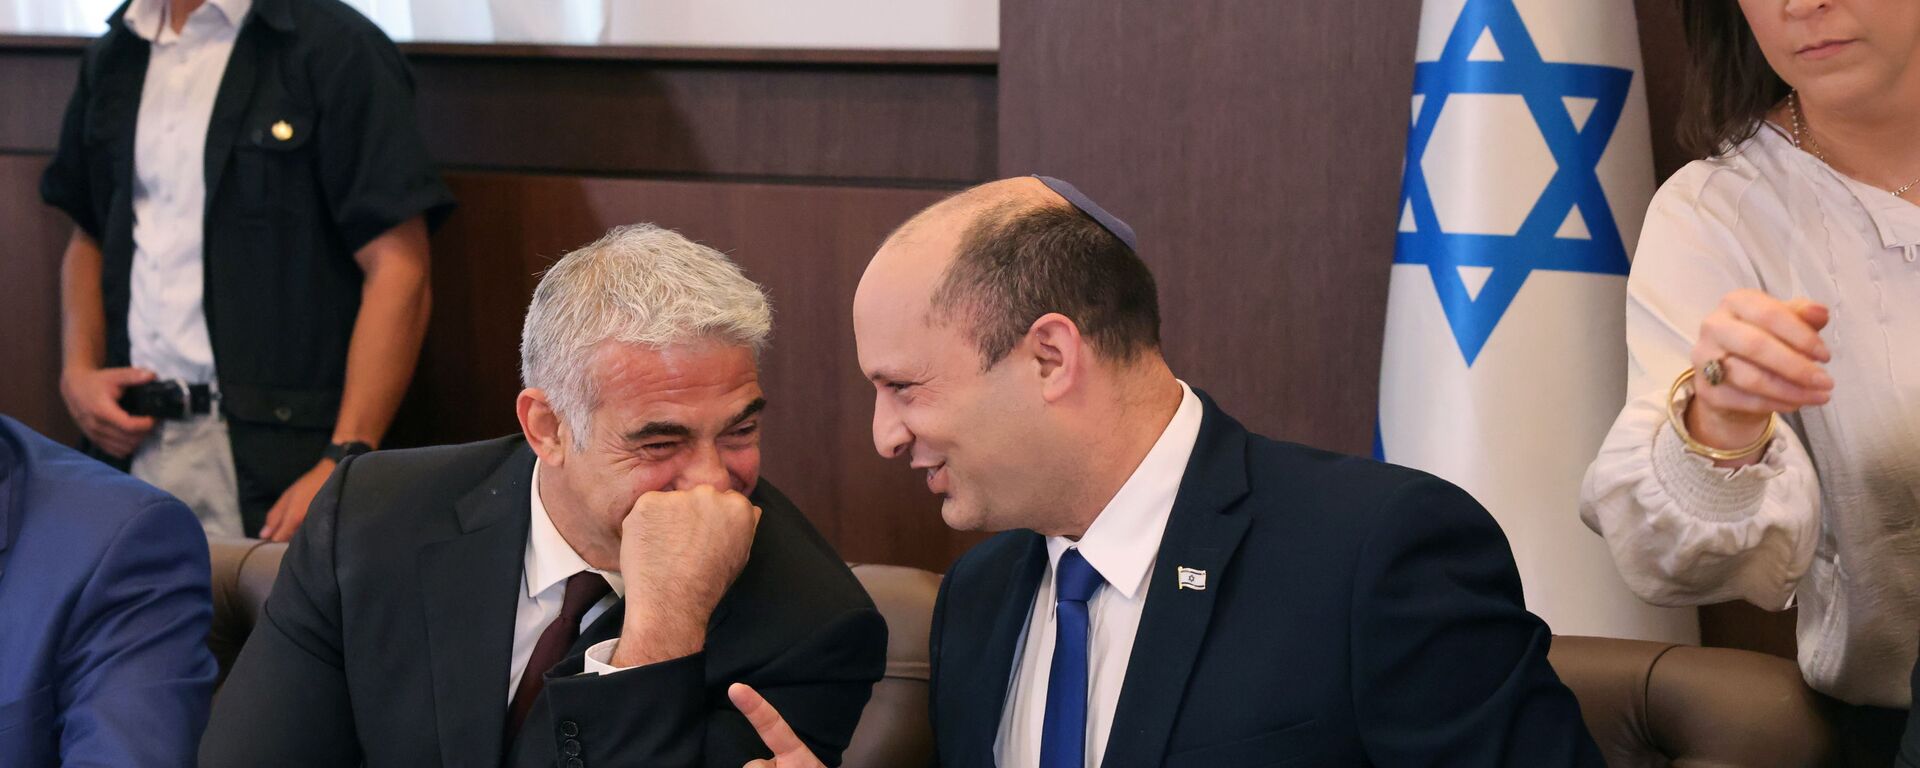 Israeli Prime Minister Naftali Bennett shares a joke with alternate Prime Minister and Foreign Minister Yair Lapid during the first weekly cabinet meeting of their new government in Jerusalem June 20, 2021. - Sputnik International, 1920, 22.09.2021